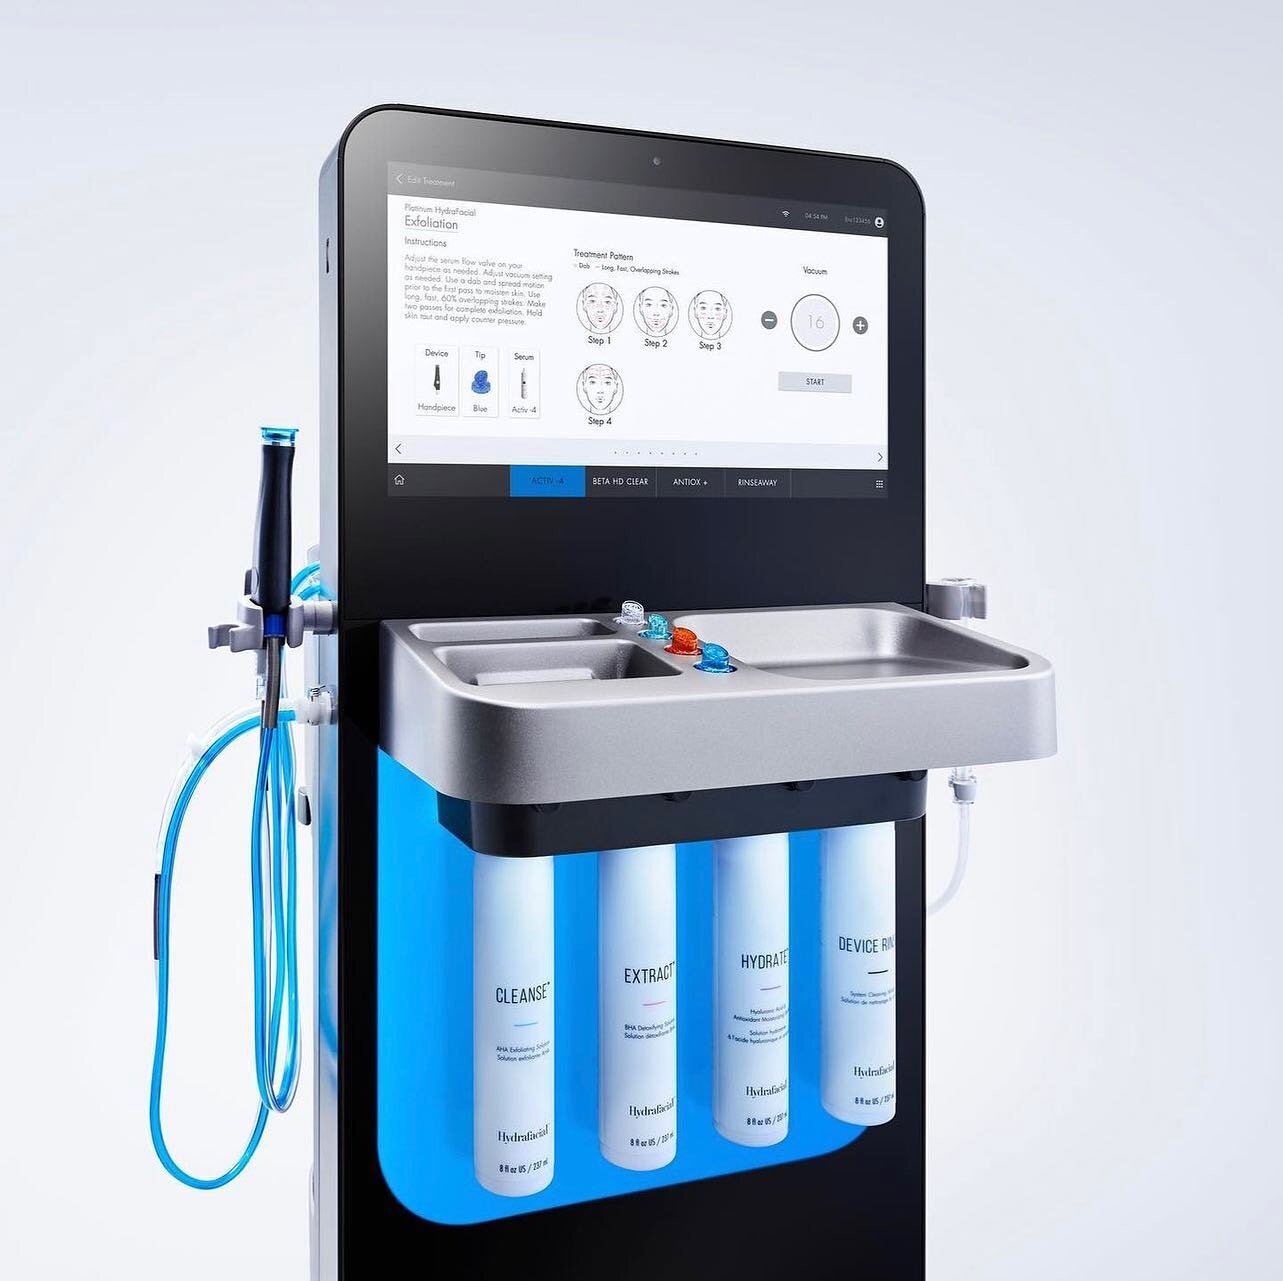 We are very excited to receive the delivery of the brand new SYNDEO Hydrafacial device tomorrow and be the first in the our local geographical area to offer this exclusive service. 

Here are some interesting facts about the SYNDEO Hydrafacial: 

The